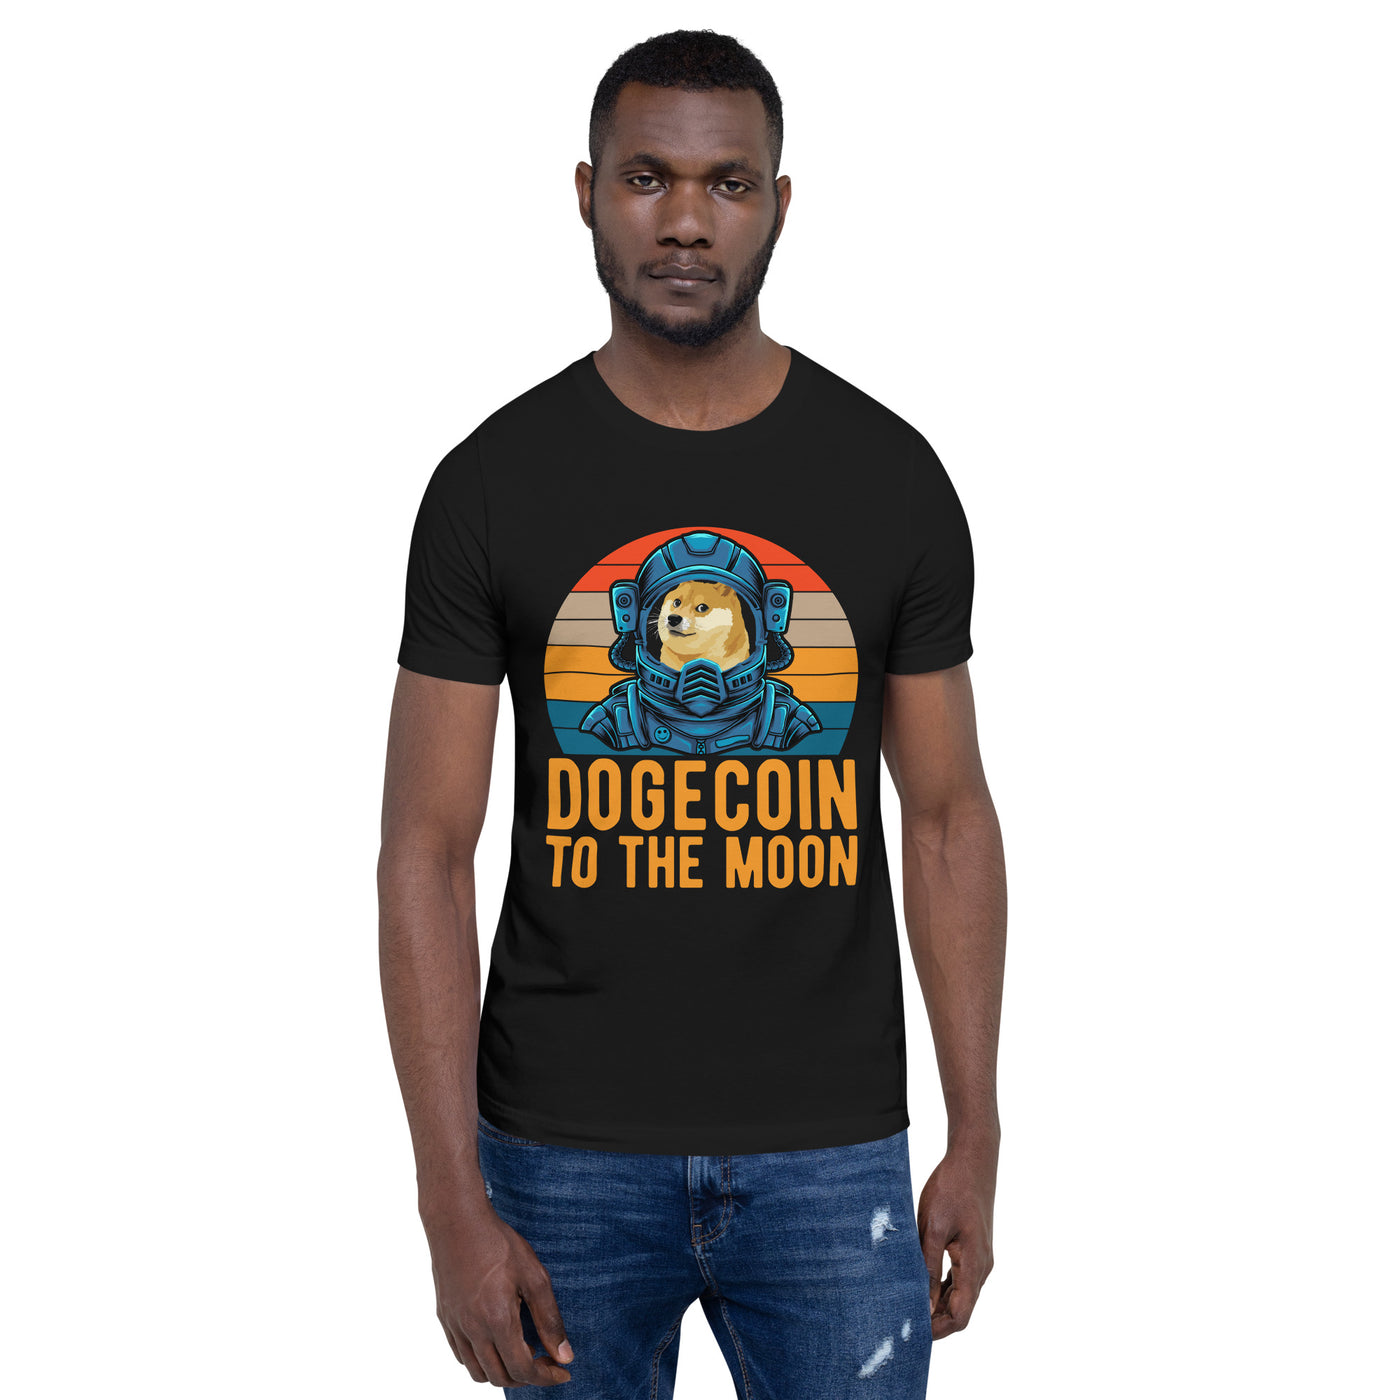 Doge Coin to the Moon - Unisex t-shirt